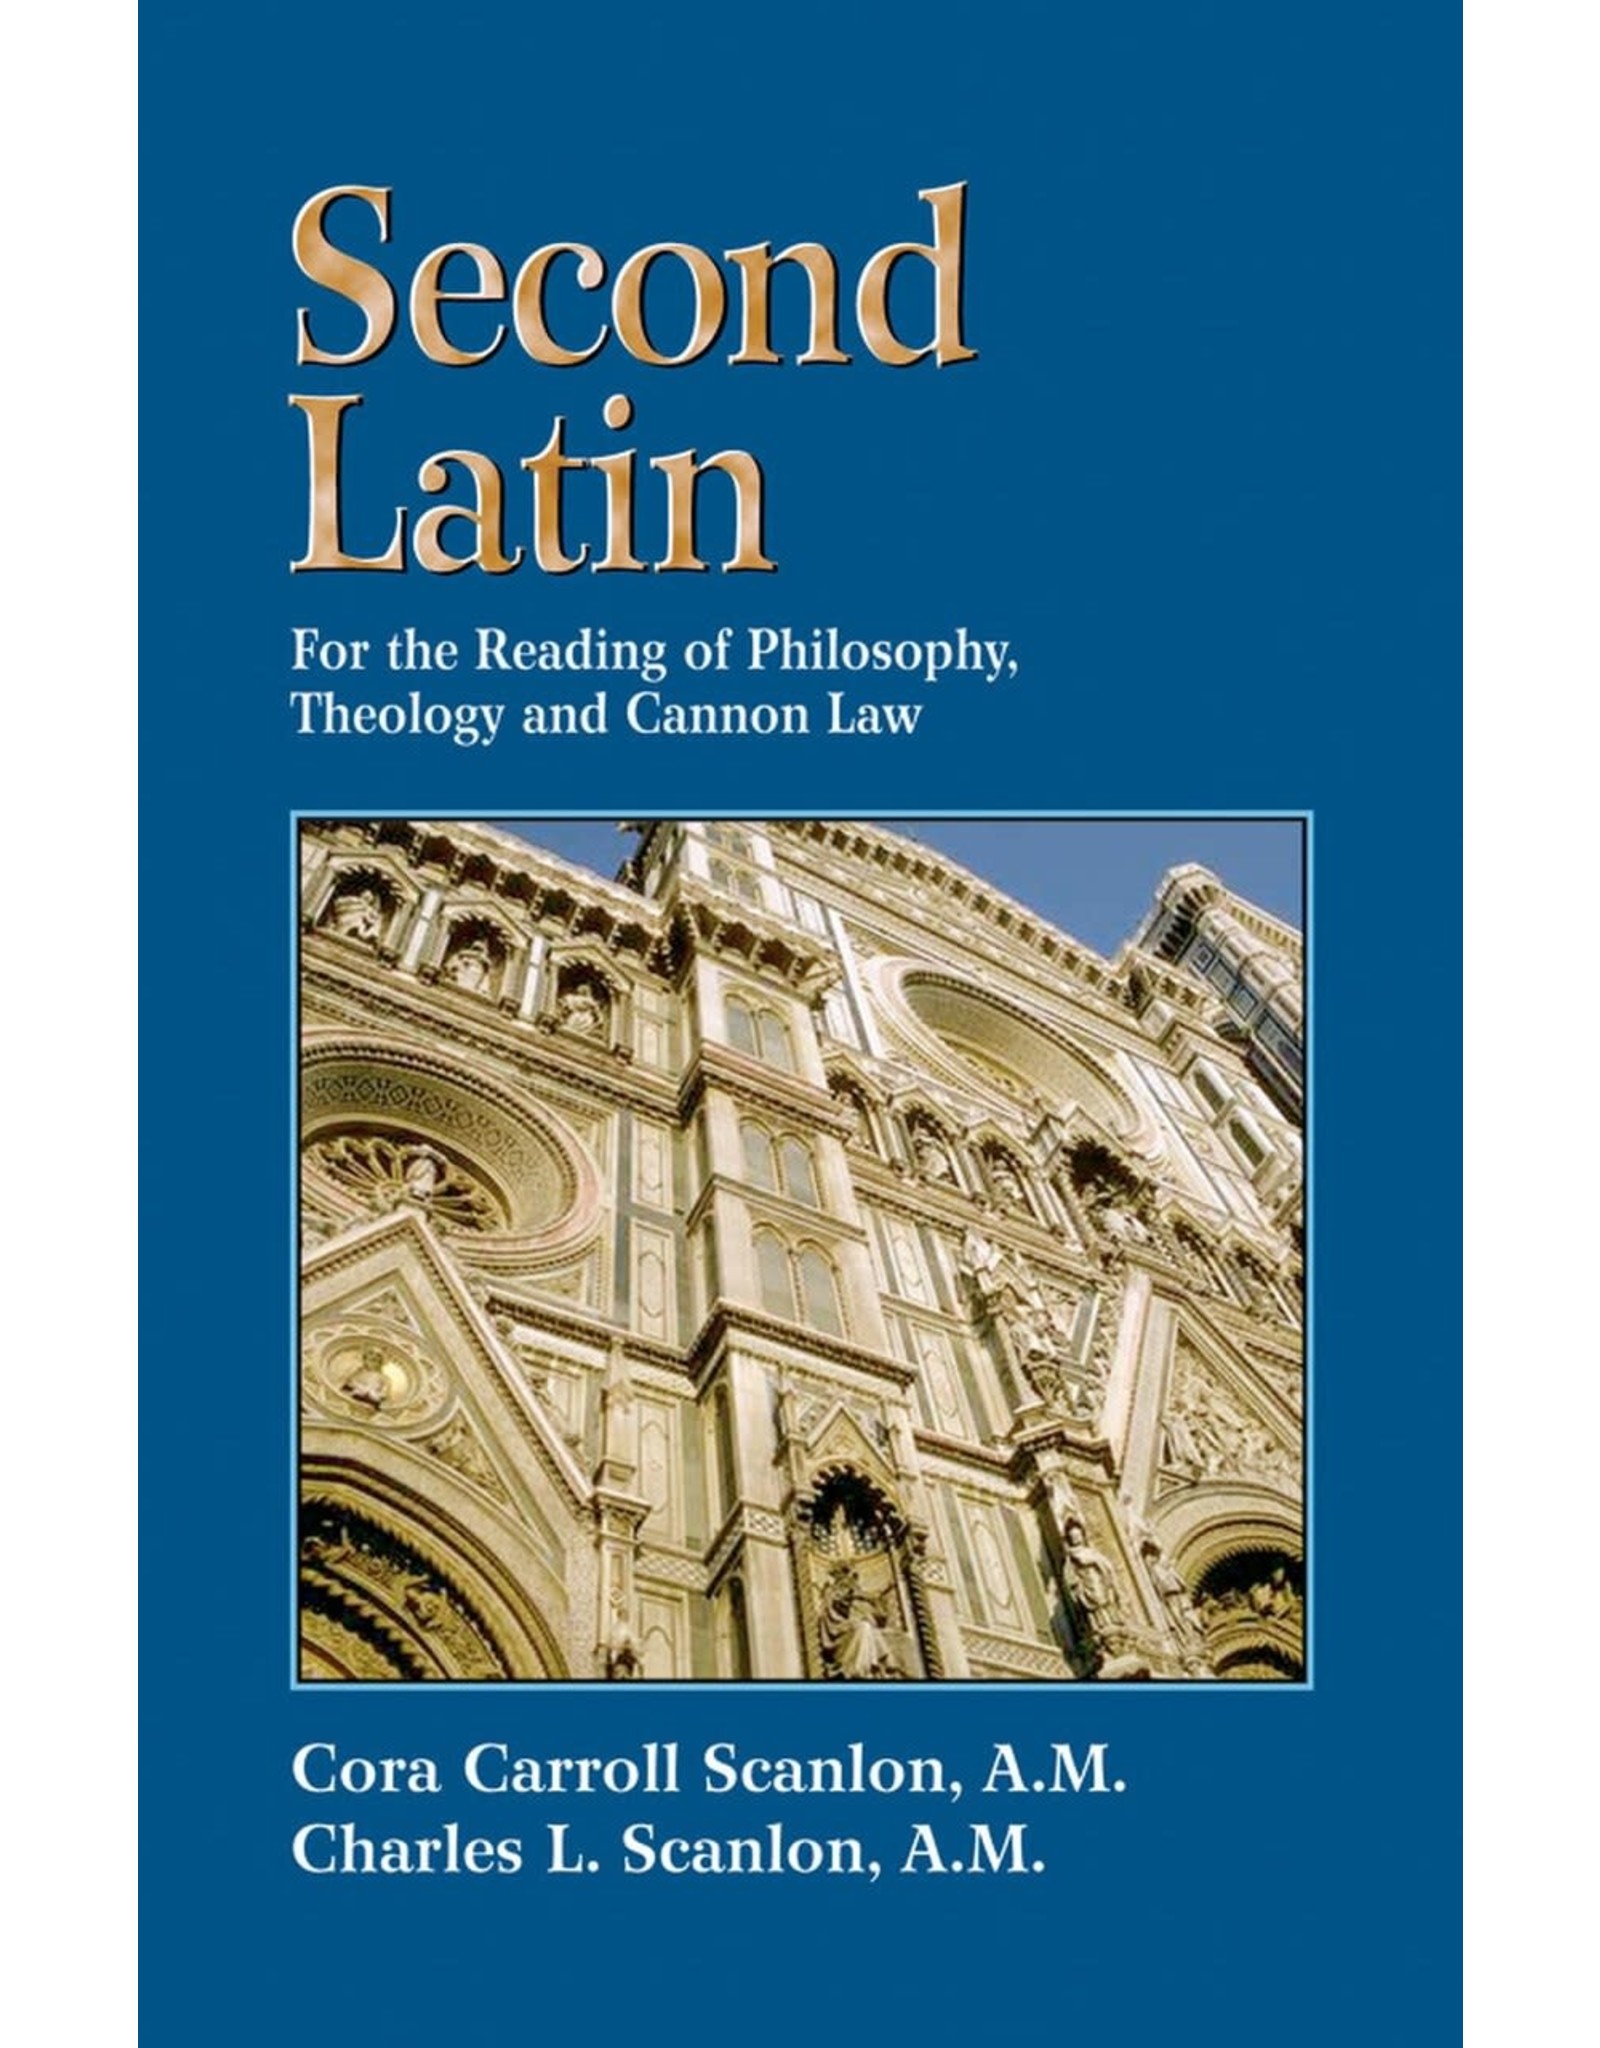 Tan Books Second Latin: Preparation For The Reading Of Philosophy, Theology And Canon Law by Cora Carroll Scanlon, A.M. (Paperback)